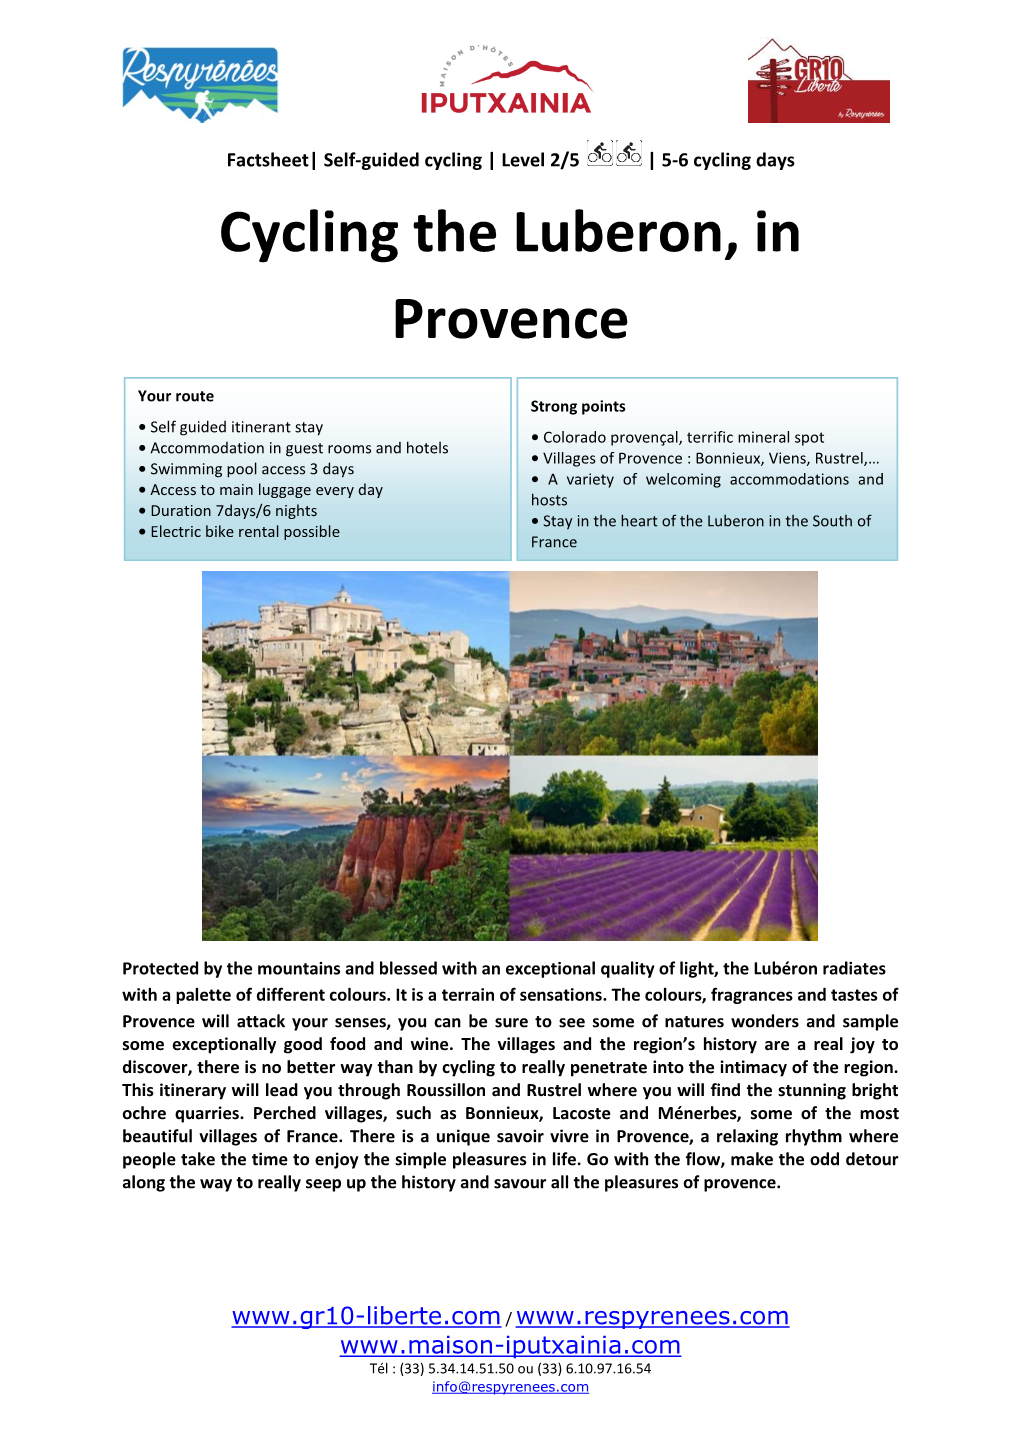 Cycling the Luberon, in Provence